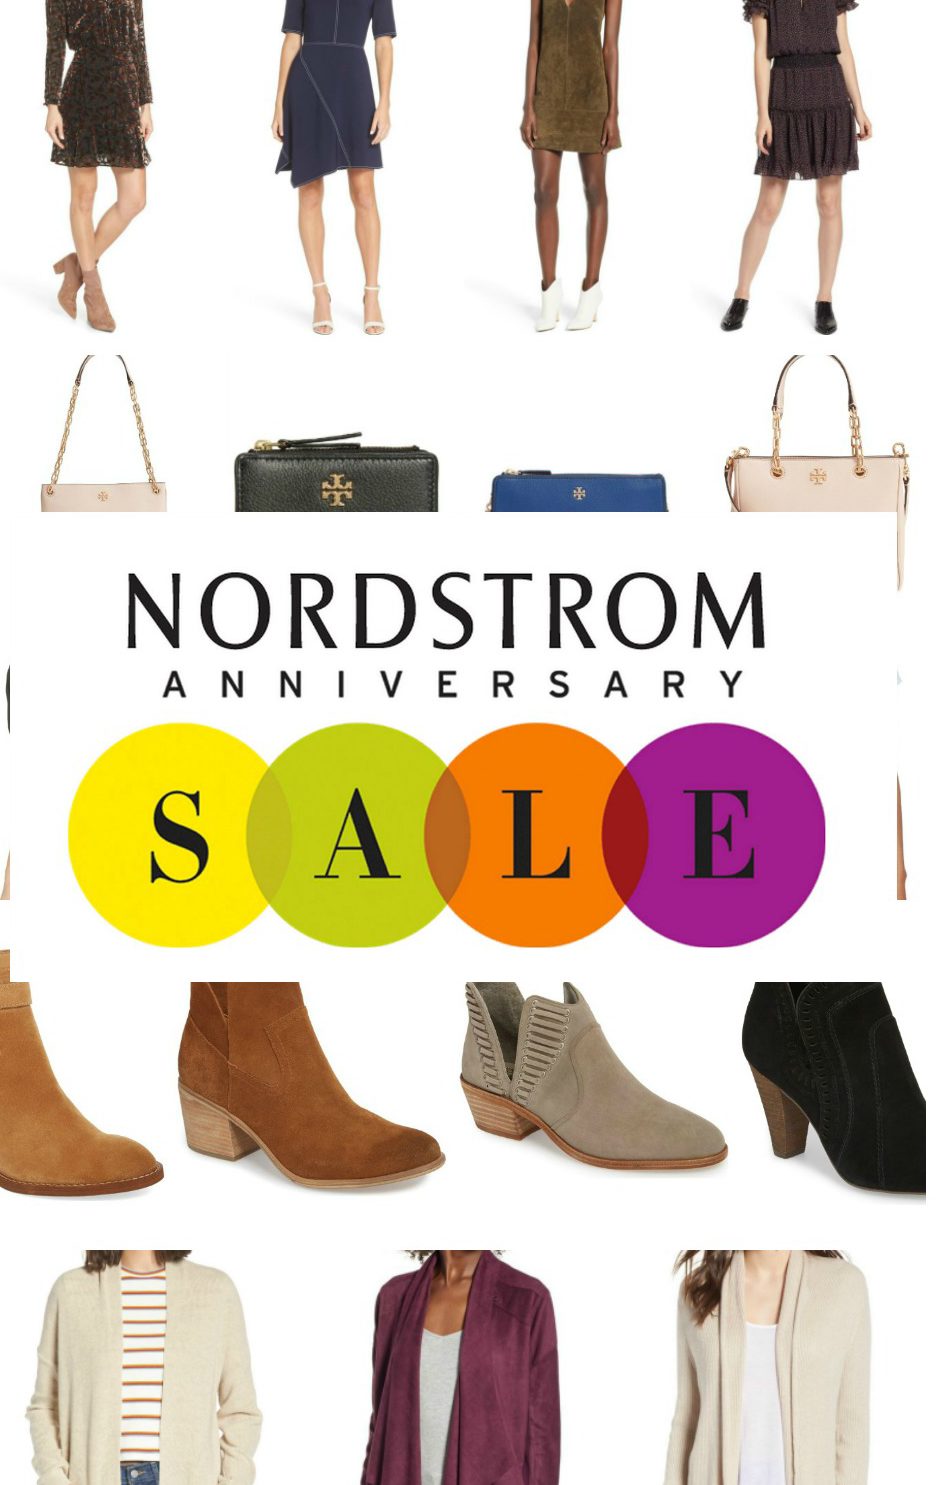 :: Nordstrom Early Access is Here! ::